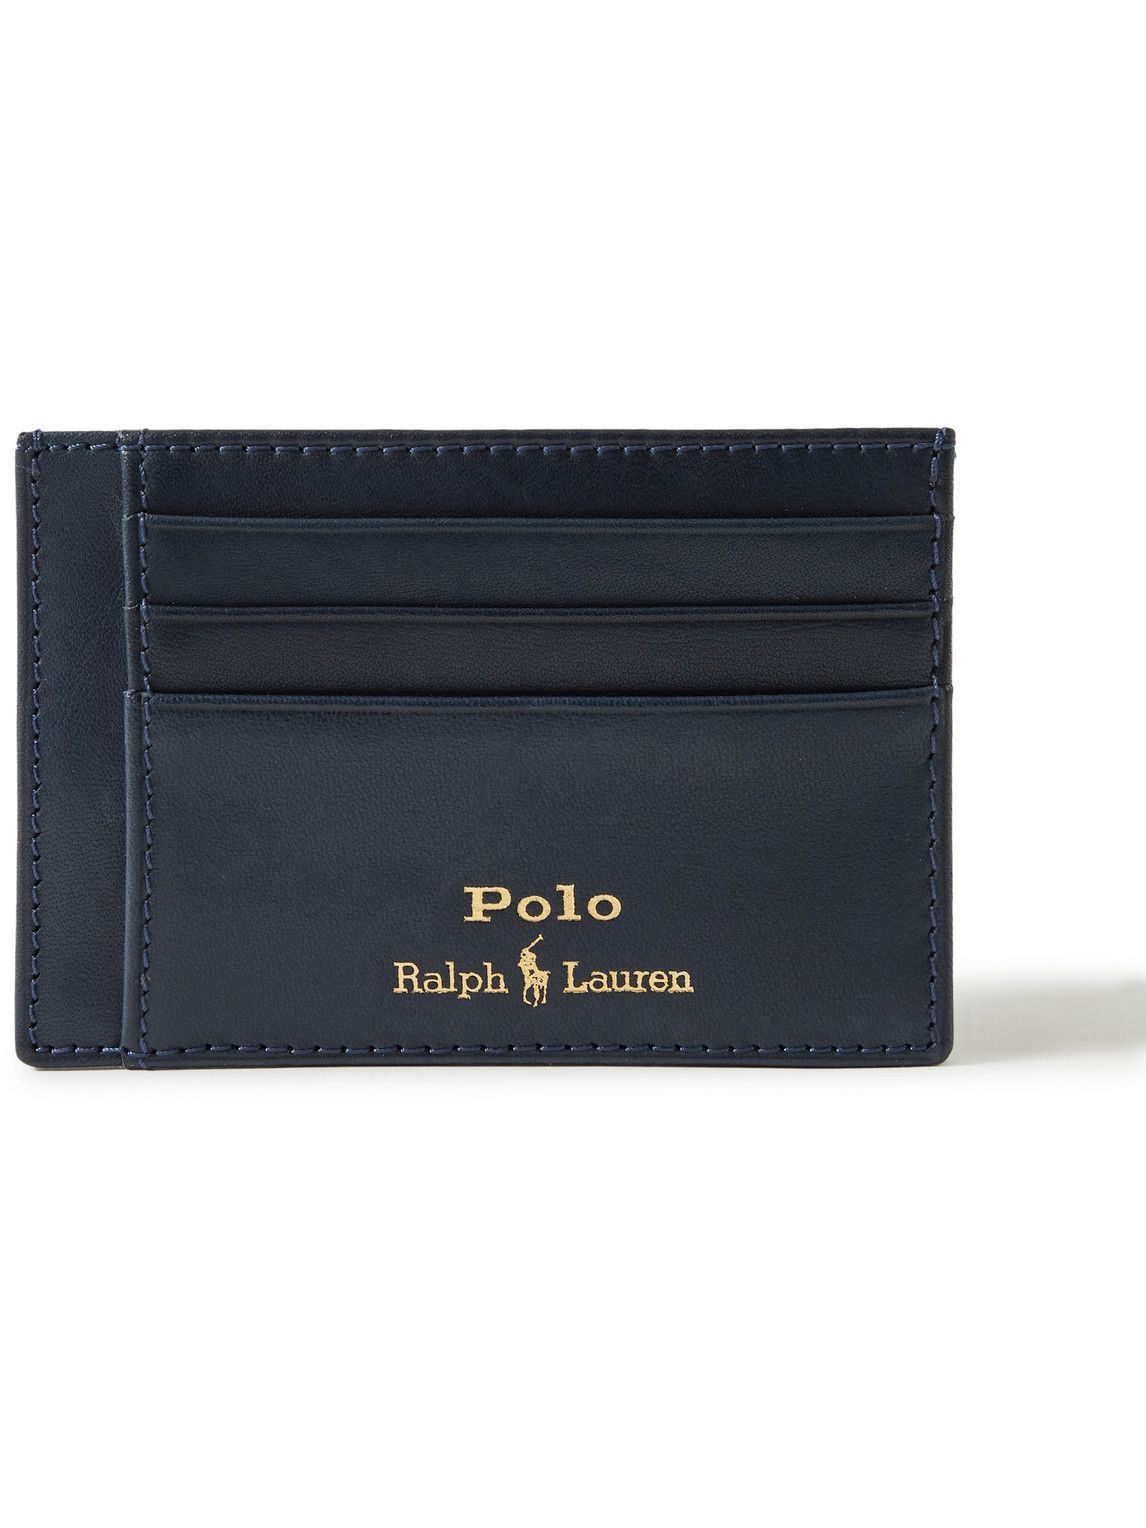 Photo: Polo Ralph Lauren - Leather Cardholder with Money Clip